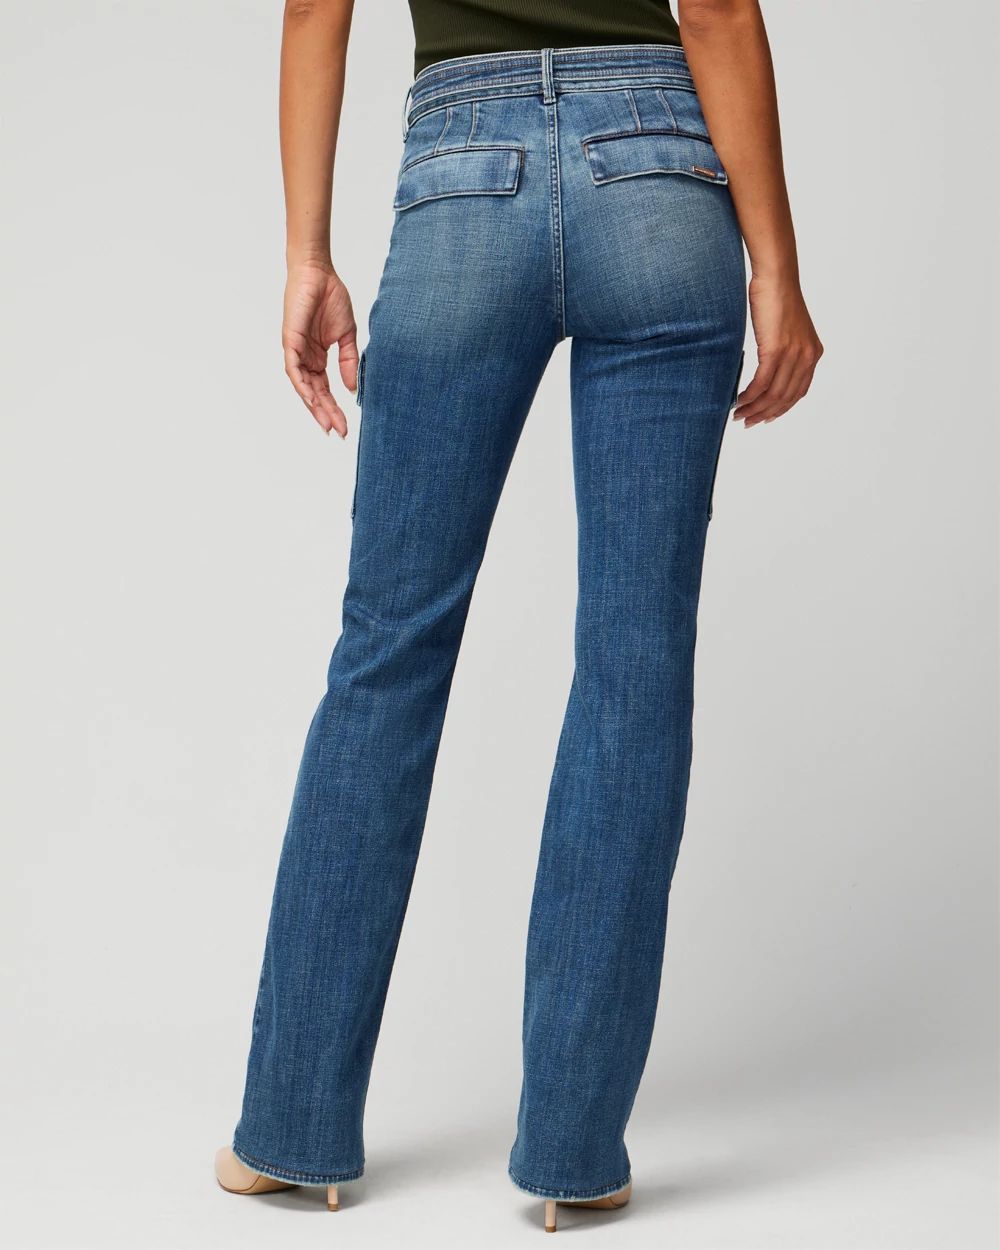 Petite High Rise Cargo Bootcut Jeans click to view larger image.